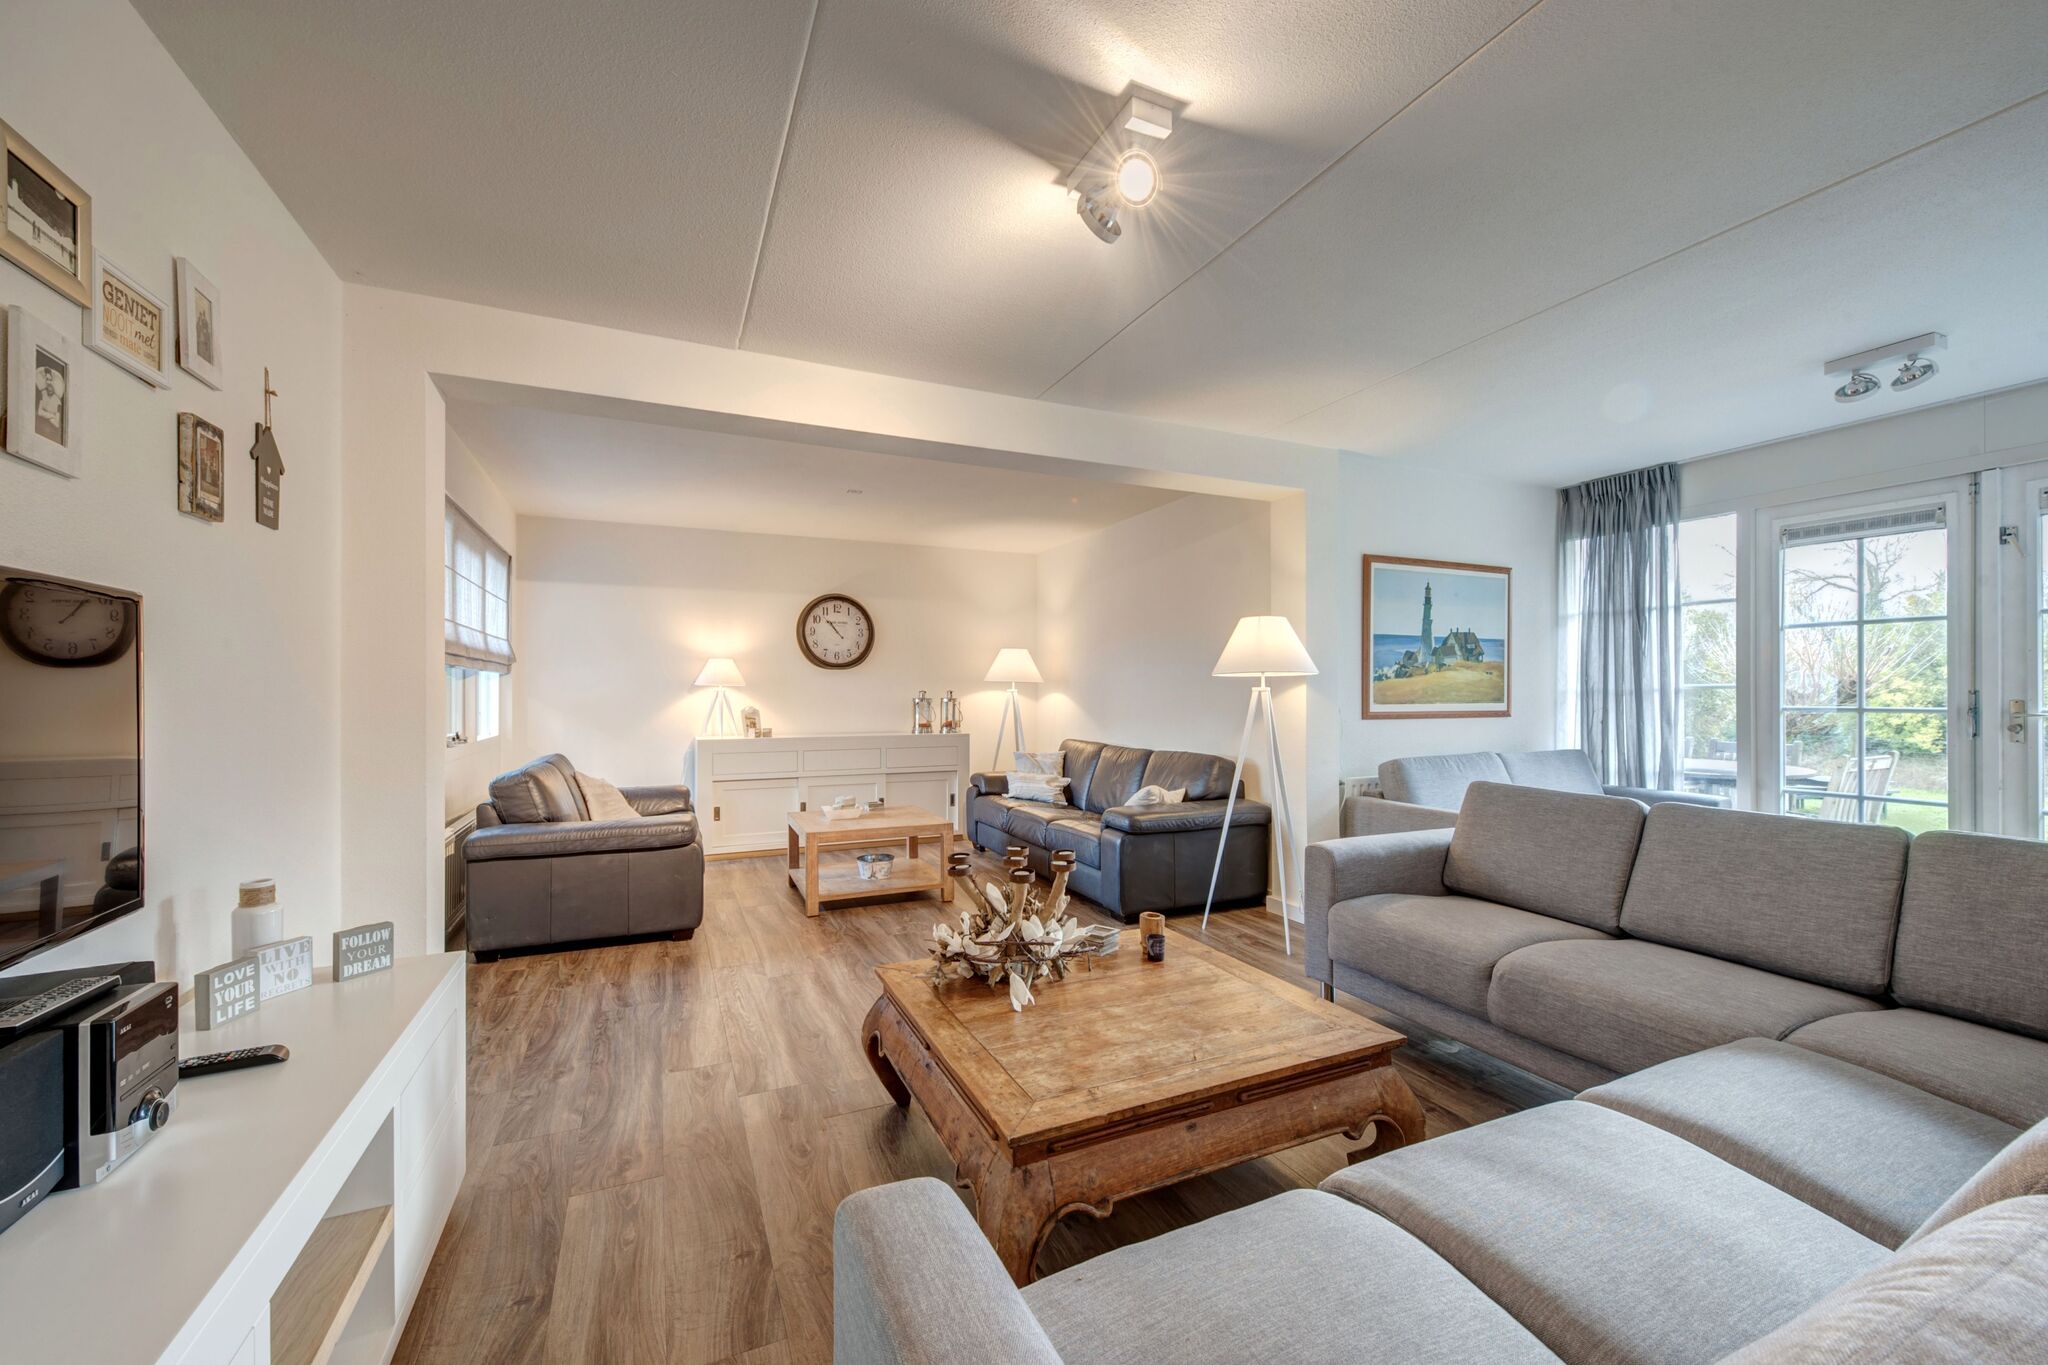 Restyled villa, sea at just 1 km., in cozy Domburg